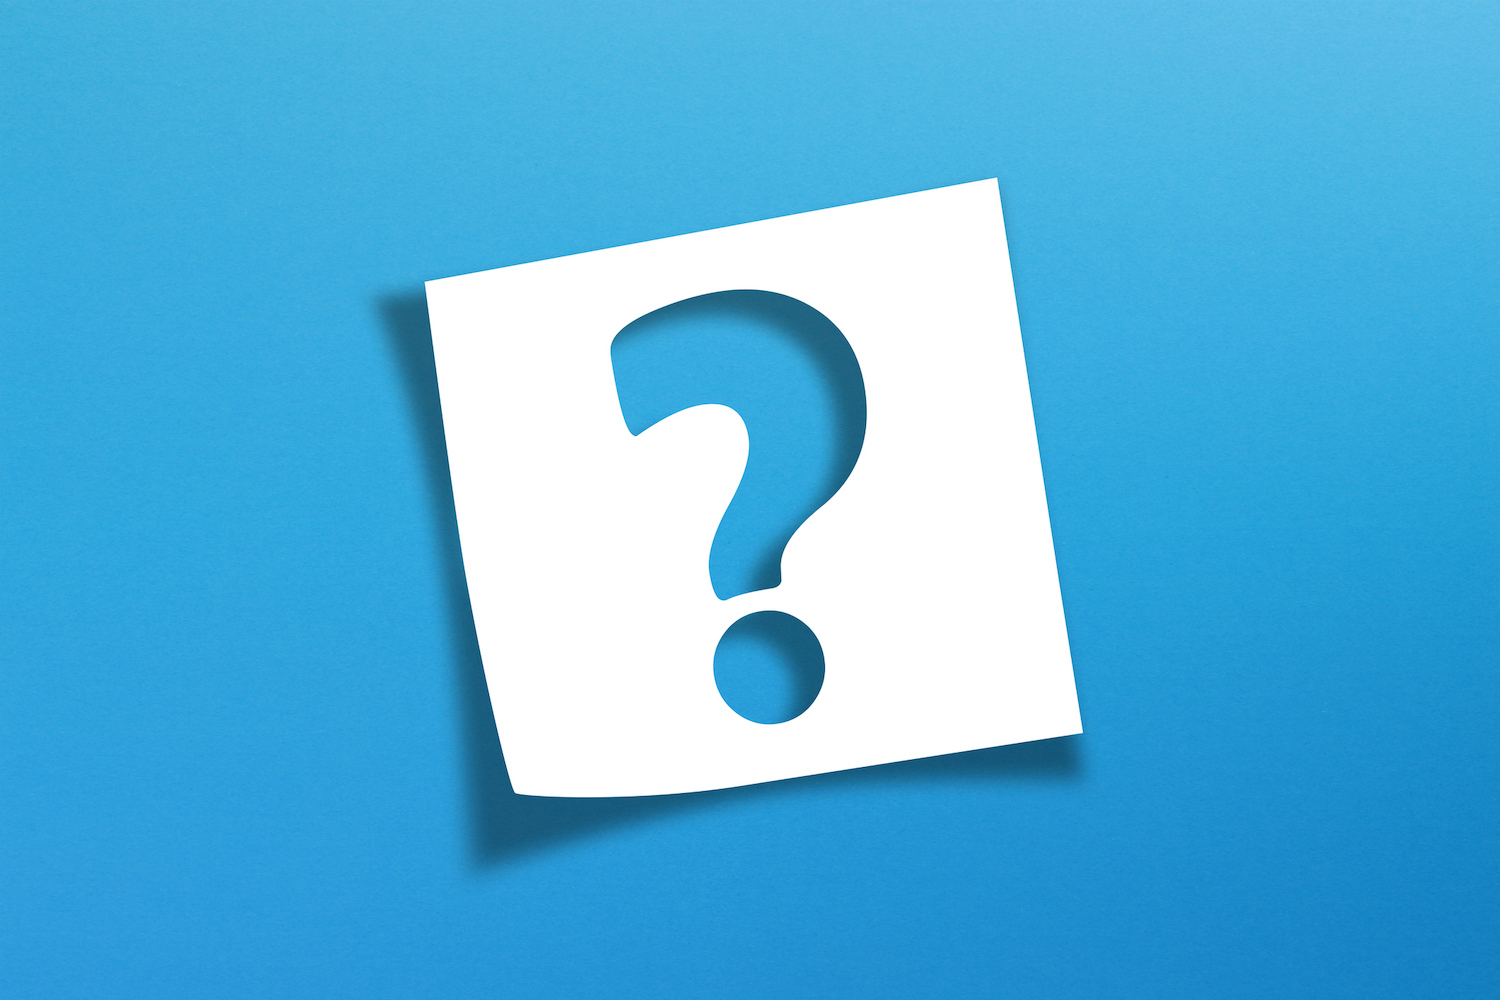 A blue question mark on a white square of paper over a blue background